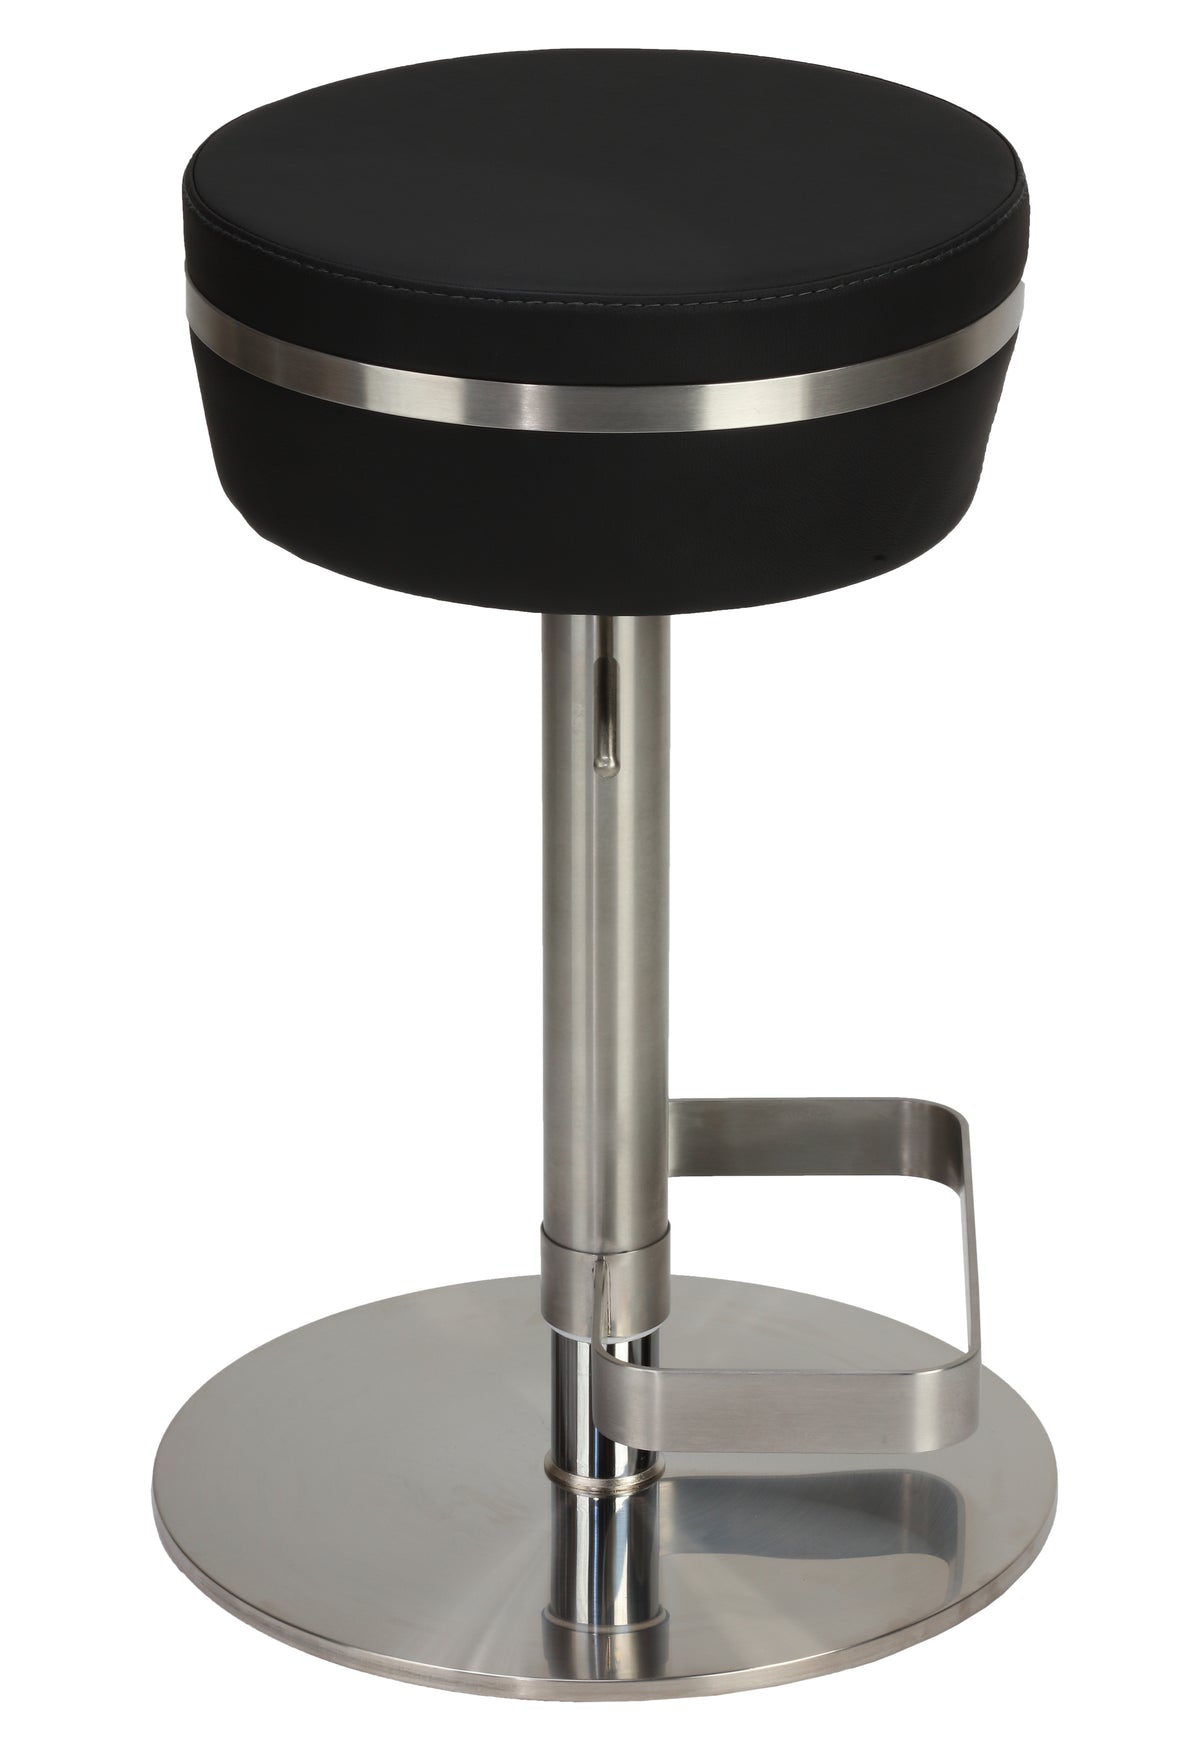 Cortesi Home Athena Premium Adjustable Backless Round Barstool in Brushed Stainless Steel with Heavy Solid Base, Black